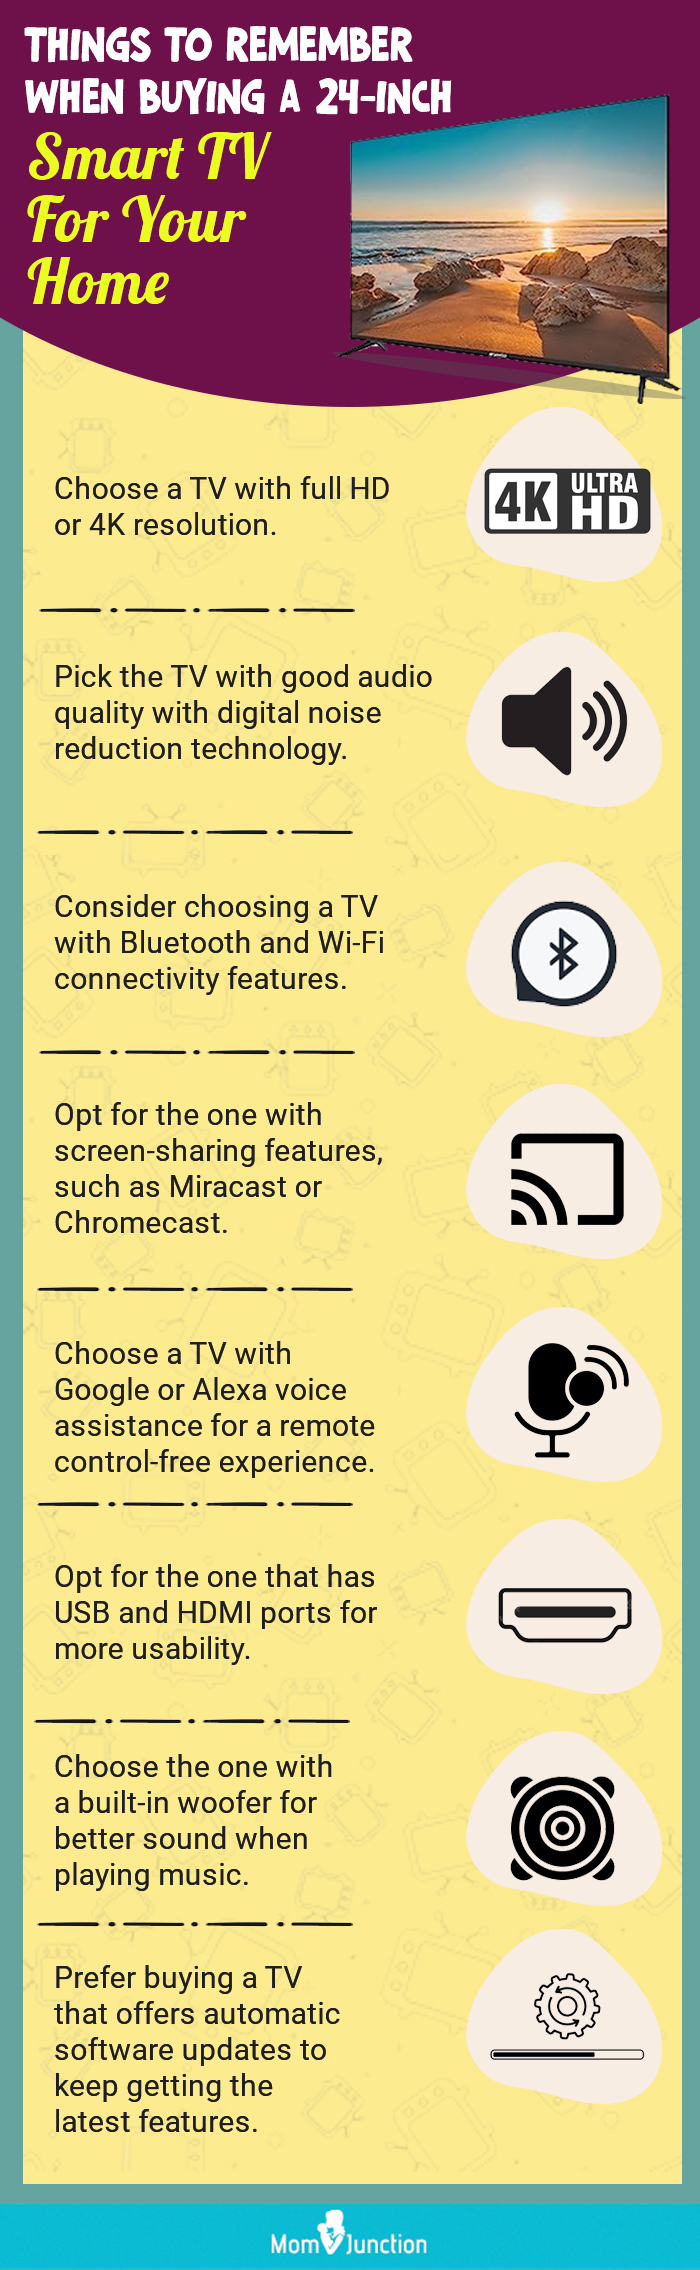 Things To Remember When Buying A 24-Inch Smart TV For Your Home (infographic)